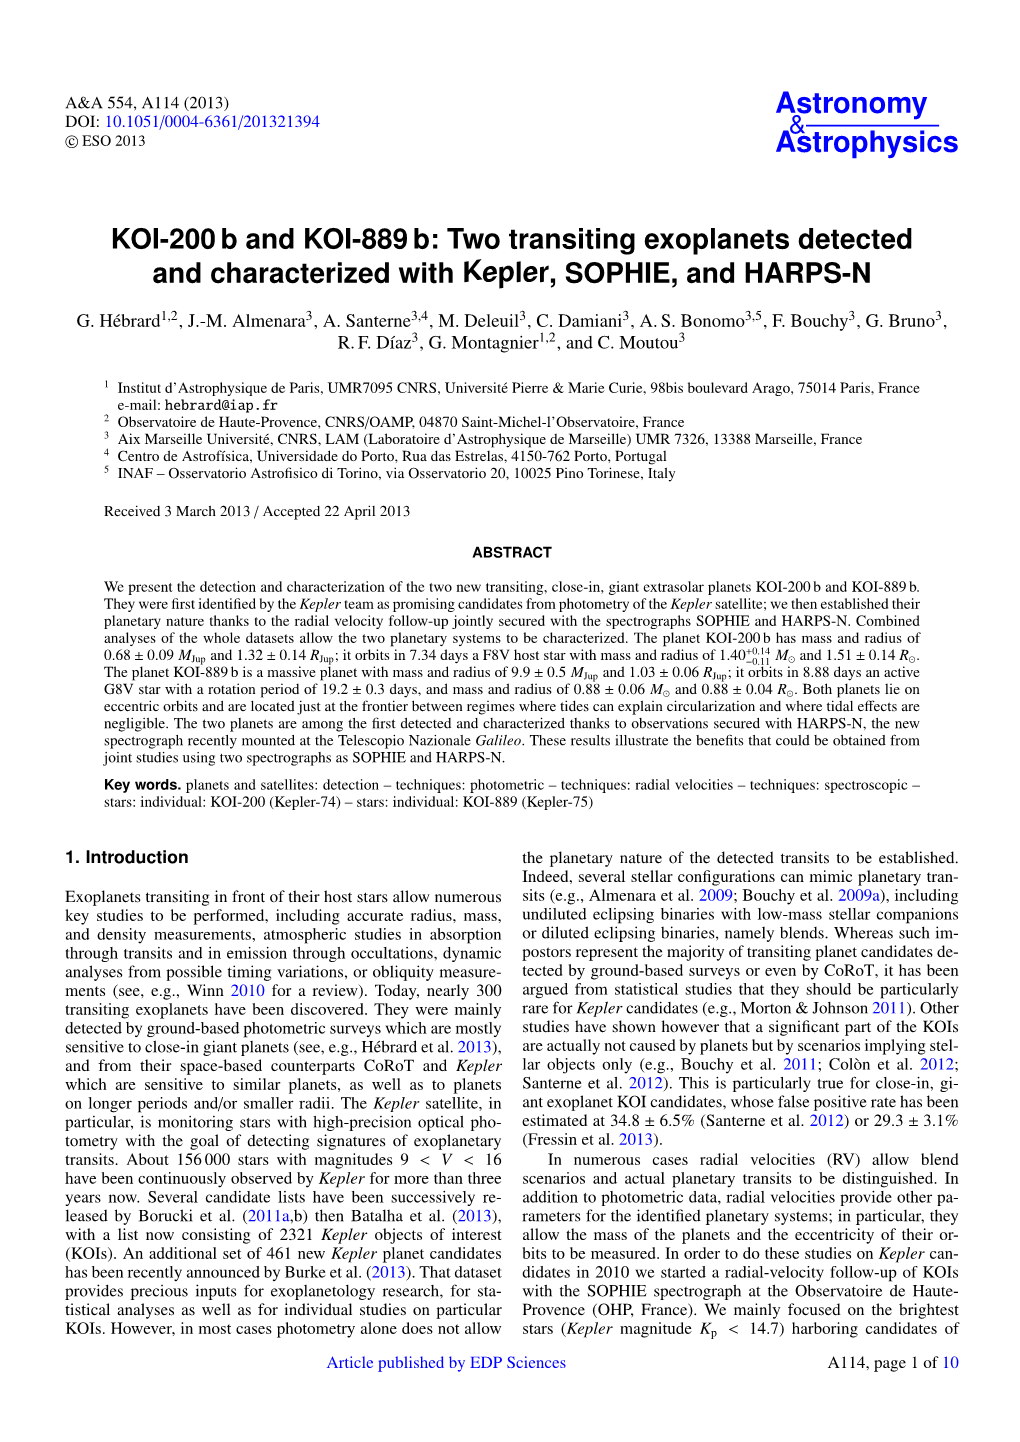 Two Transiting Exoplanets Detected and Characterized with Kepler, SOPHIE, and HARPS-N